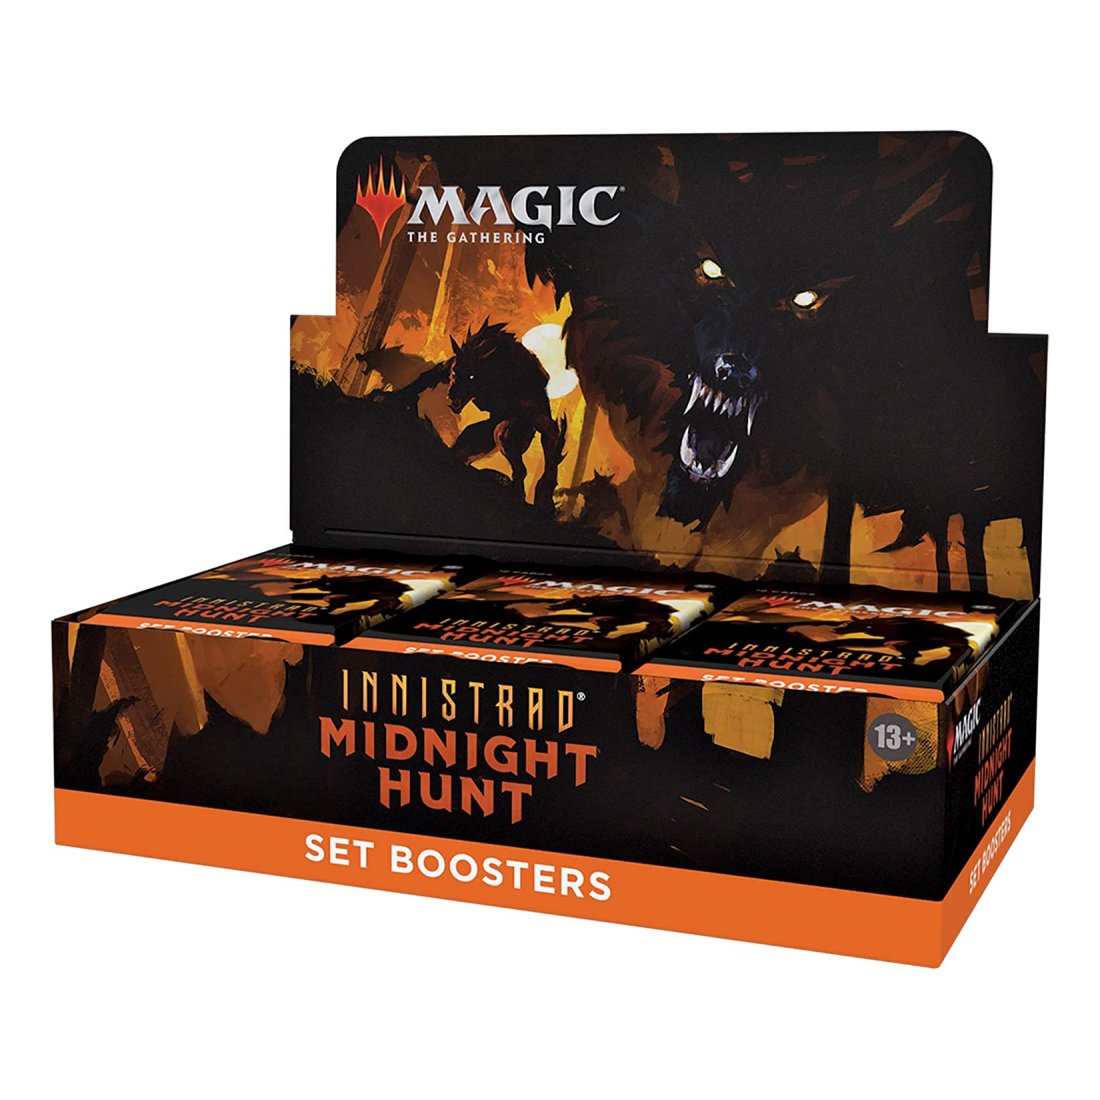 Magic The Gathering - Innistrad Midnight hunt - Set Boosters